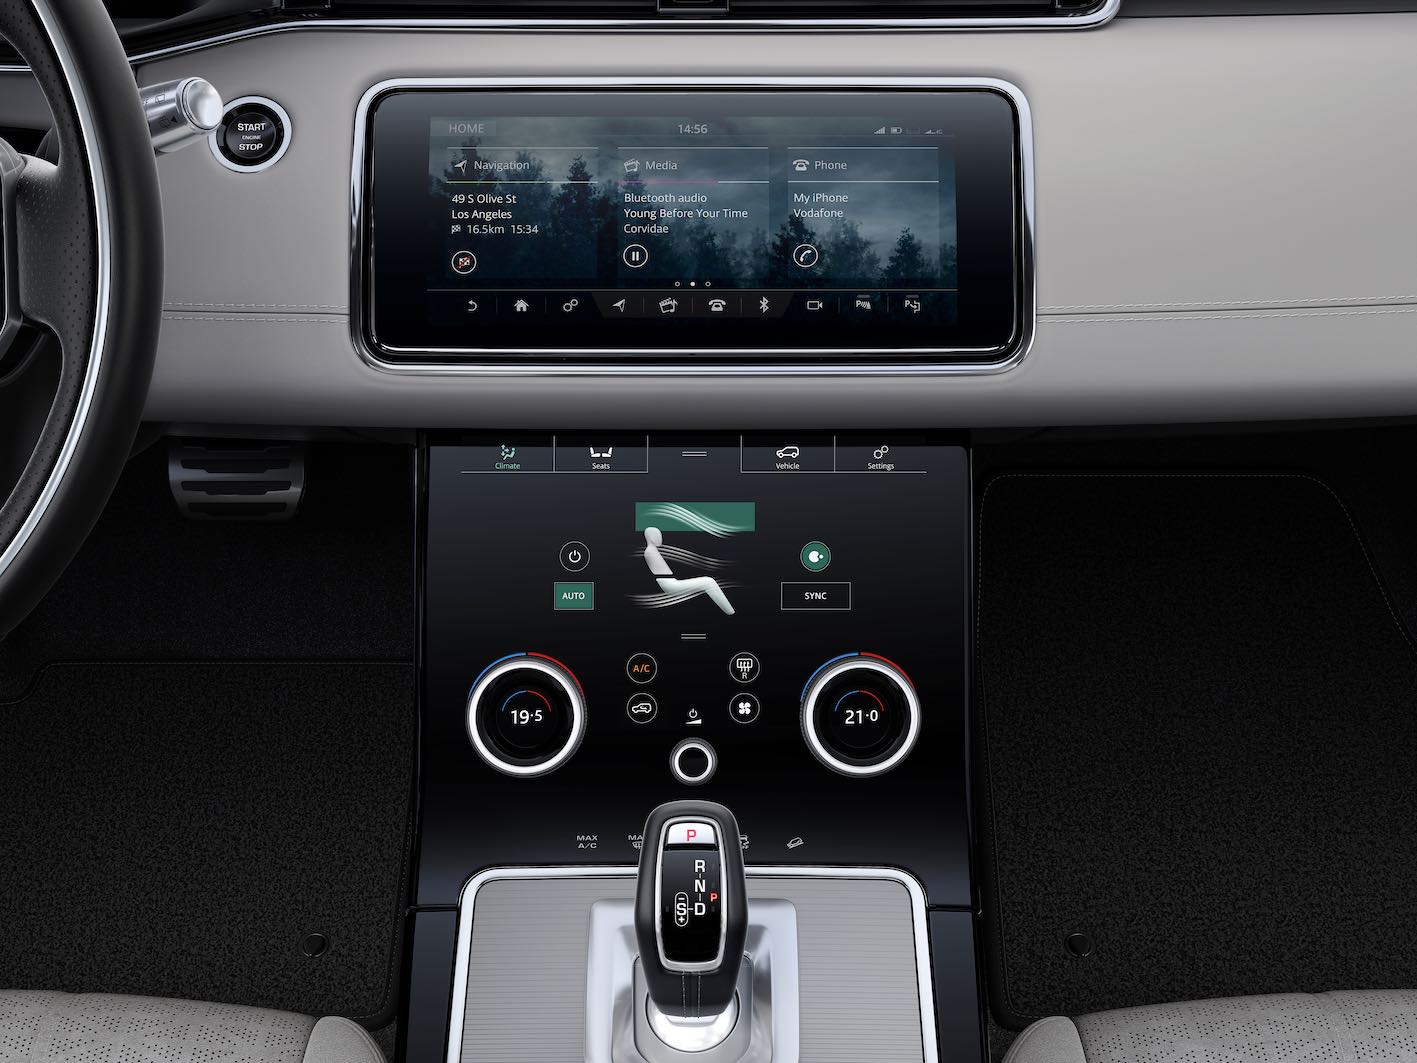 Range Rover Evoque Touch Pro Duo Display